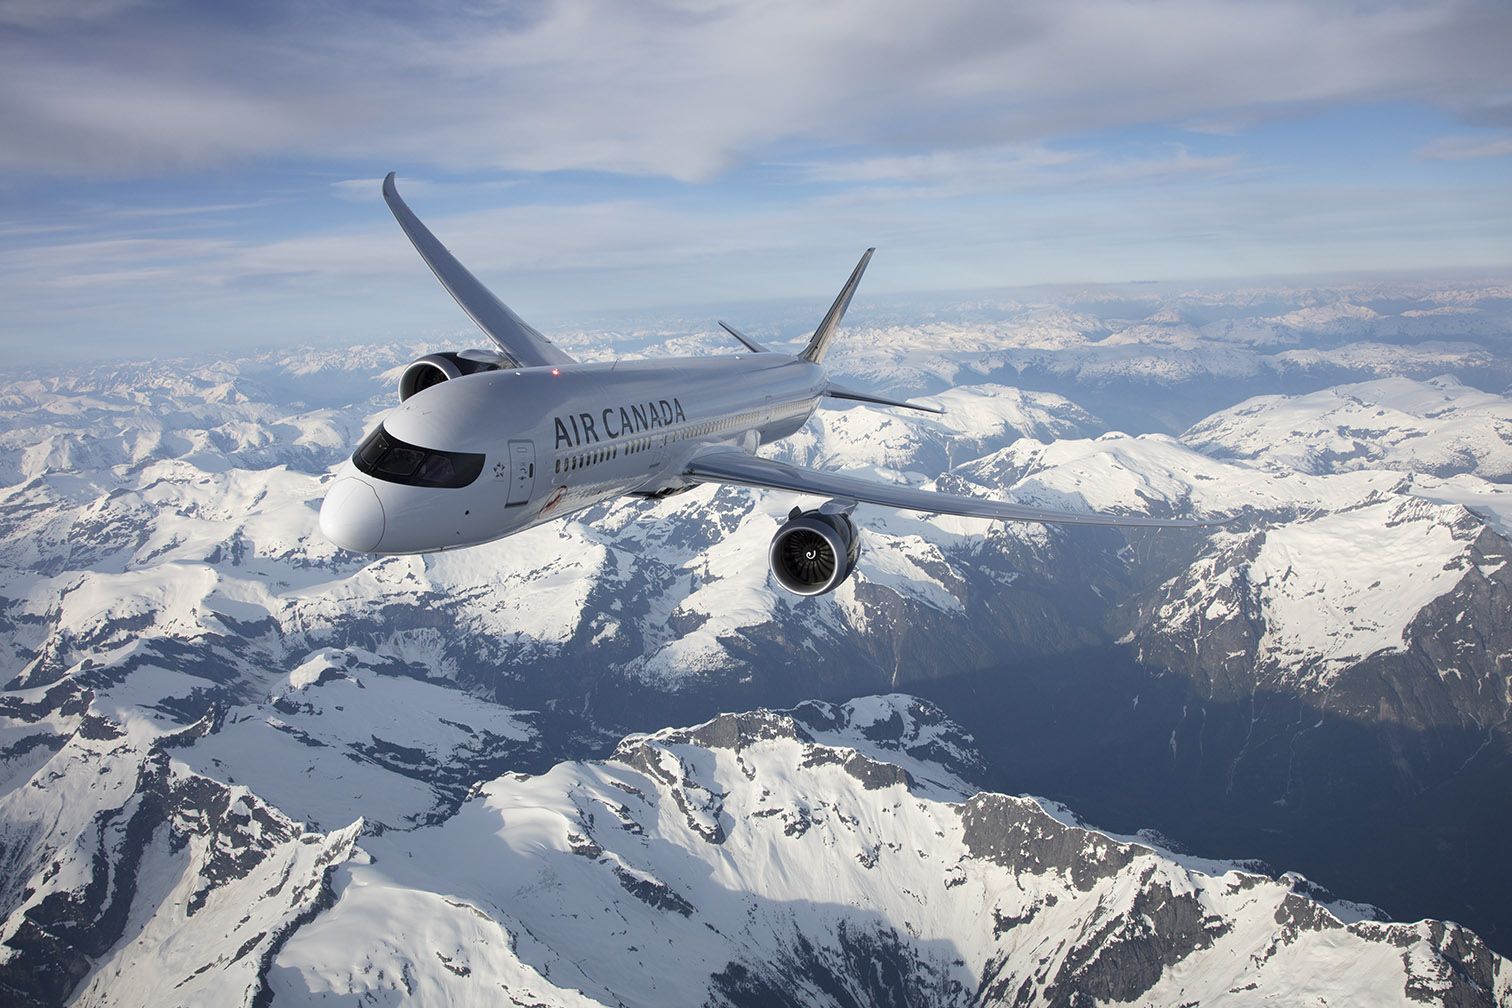 An incredible photo of the Air Canada 787-9 over the West Coast mountains. Photo: Brian Losito / Air Canada